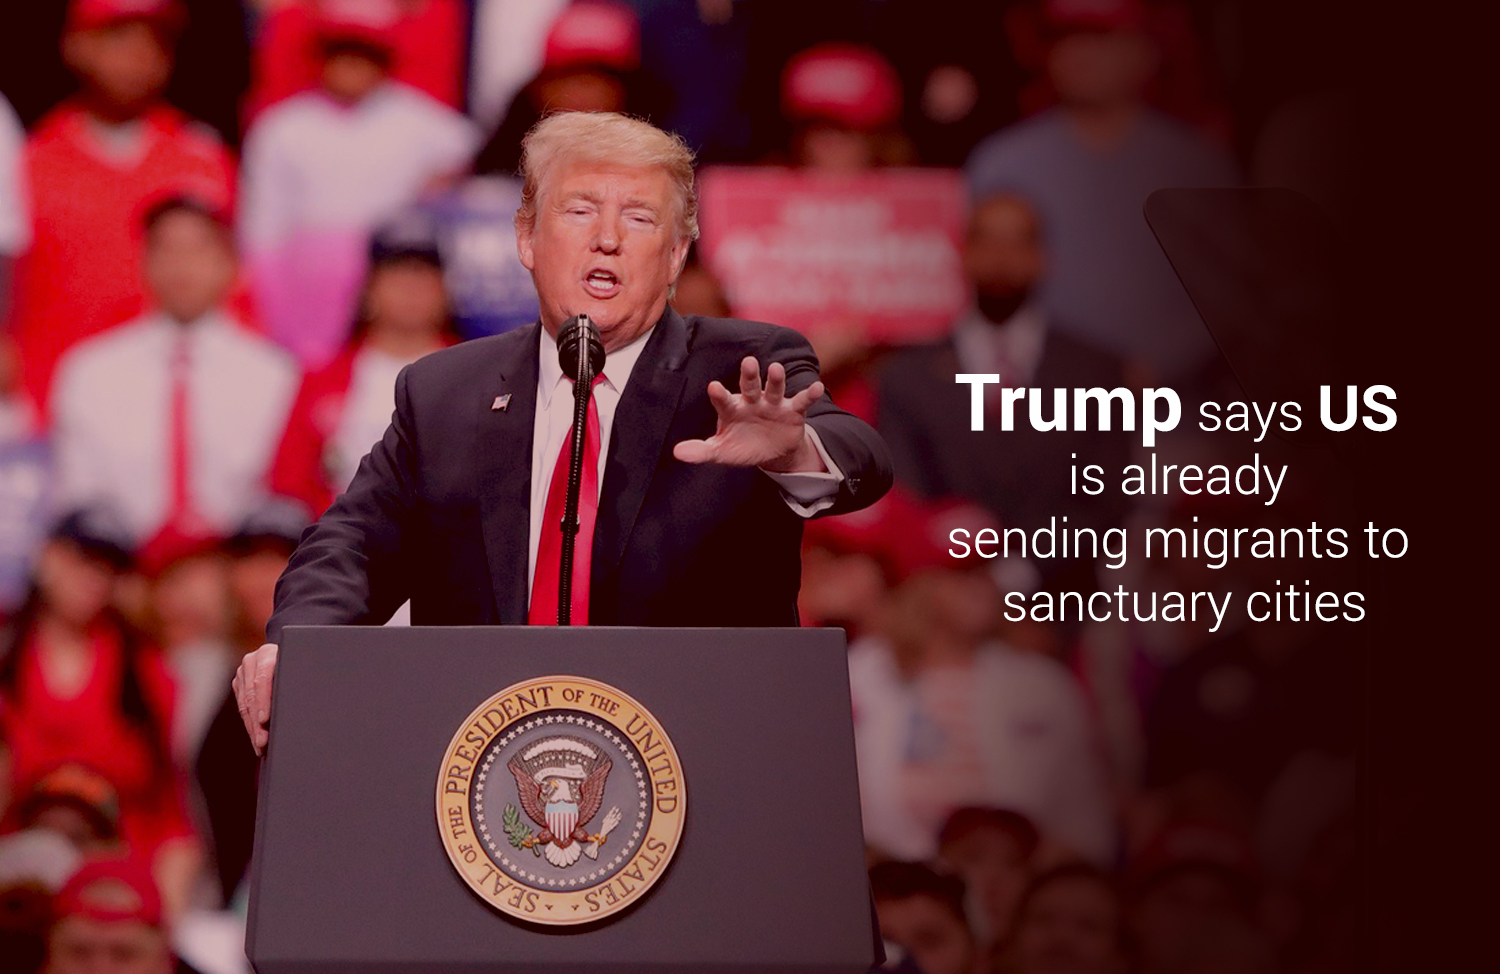 Trump Announced they Already Directing Migrants to Secure Cities